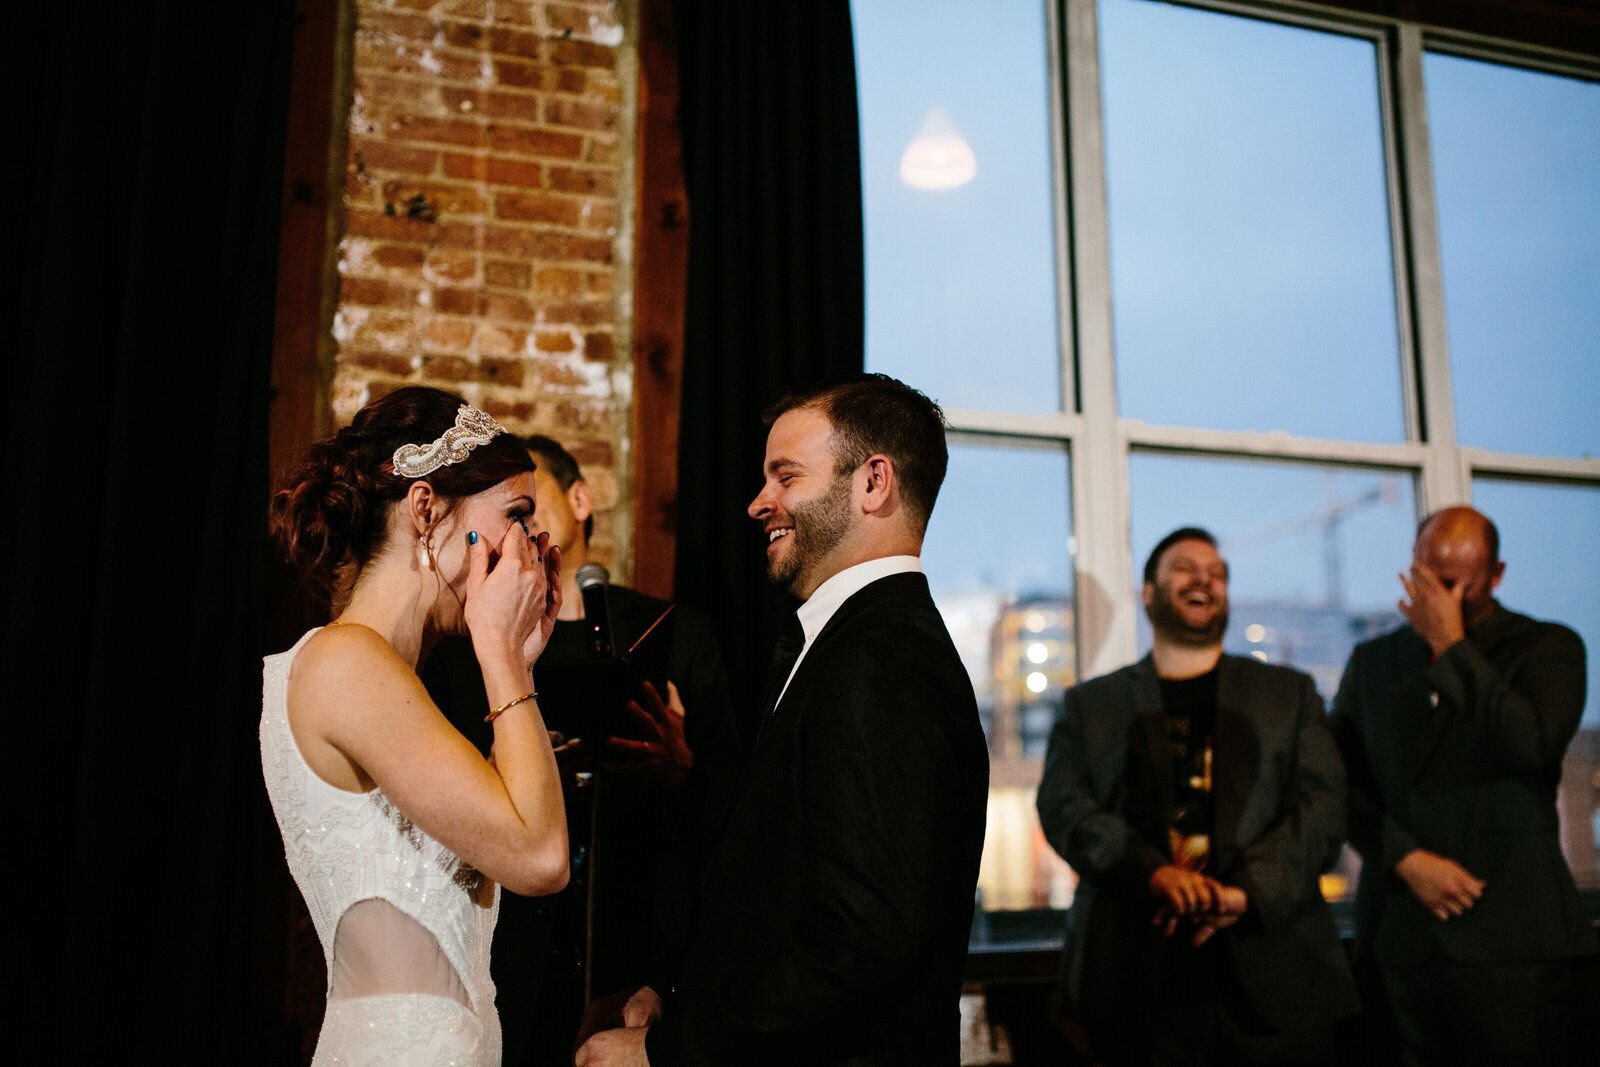 Bride wipes away happy tears during wedding ceremony